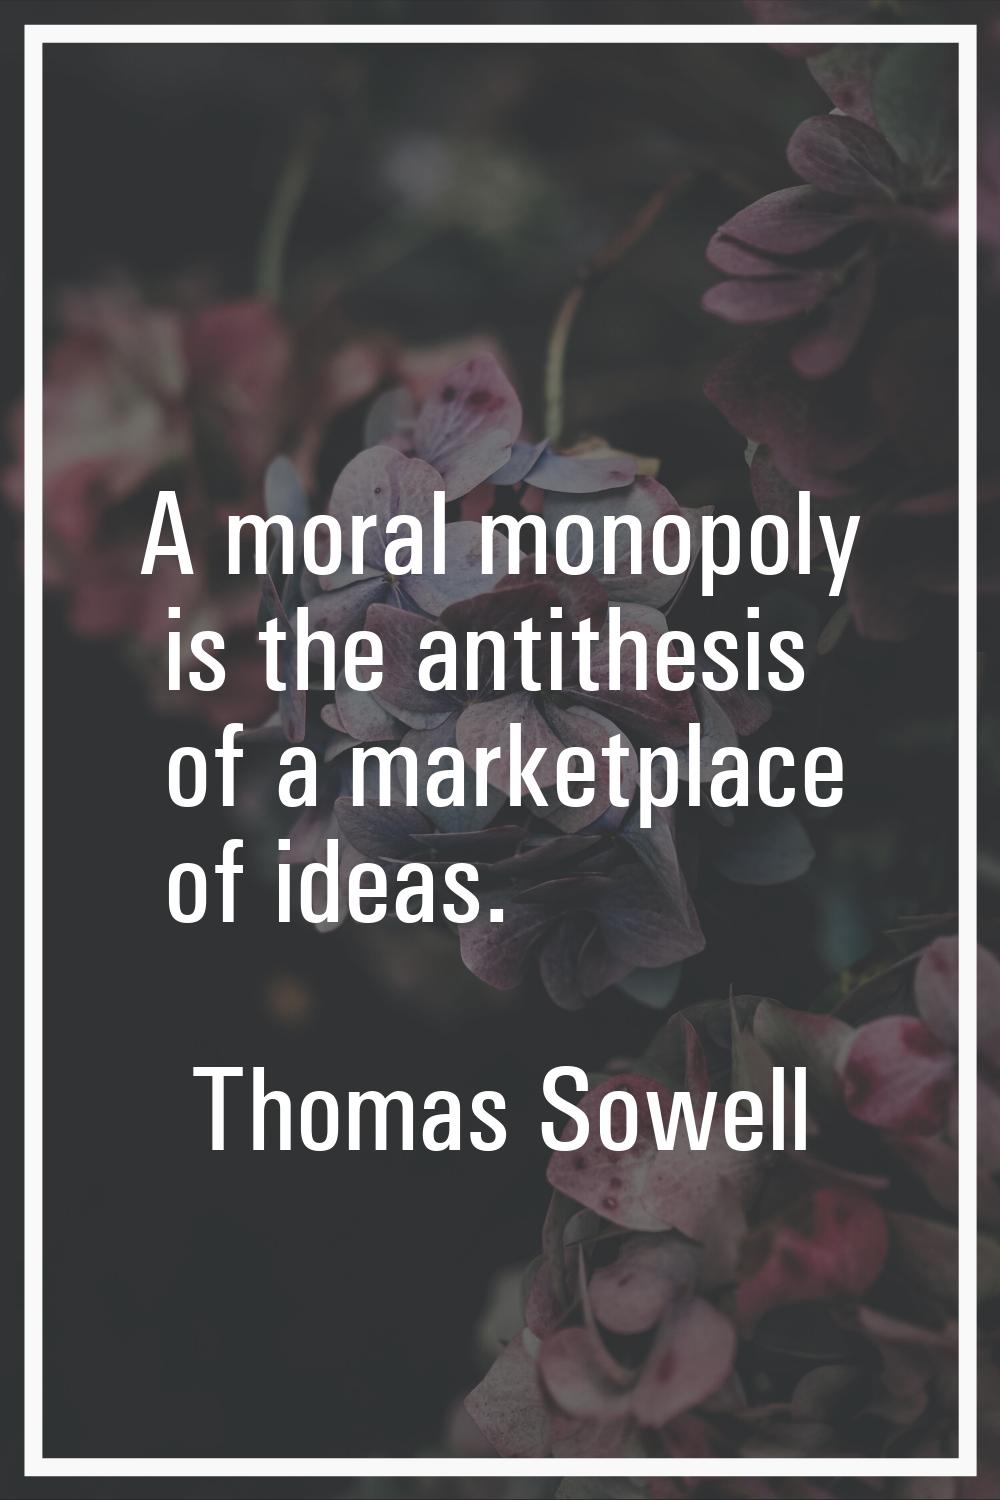 A moral monopoly is the antithesis of a marketplace of ideas.